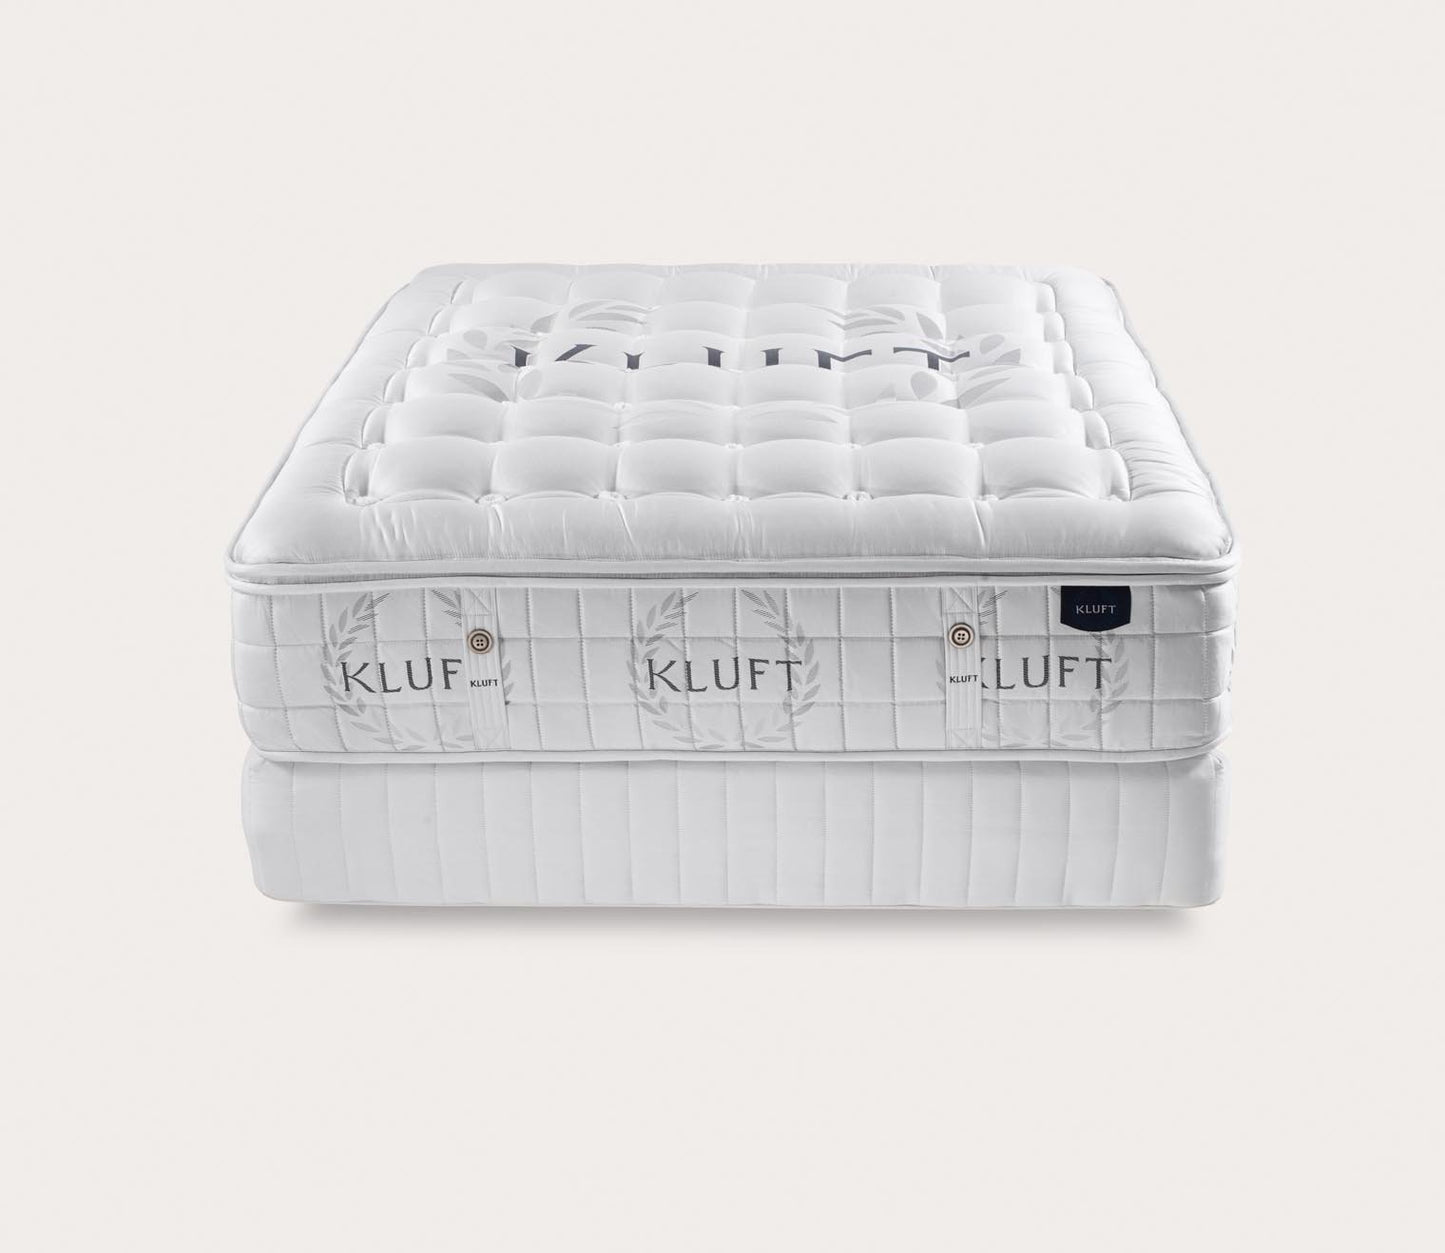 Imperial Luxetop Plush Mattress by Kluft